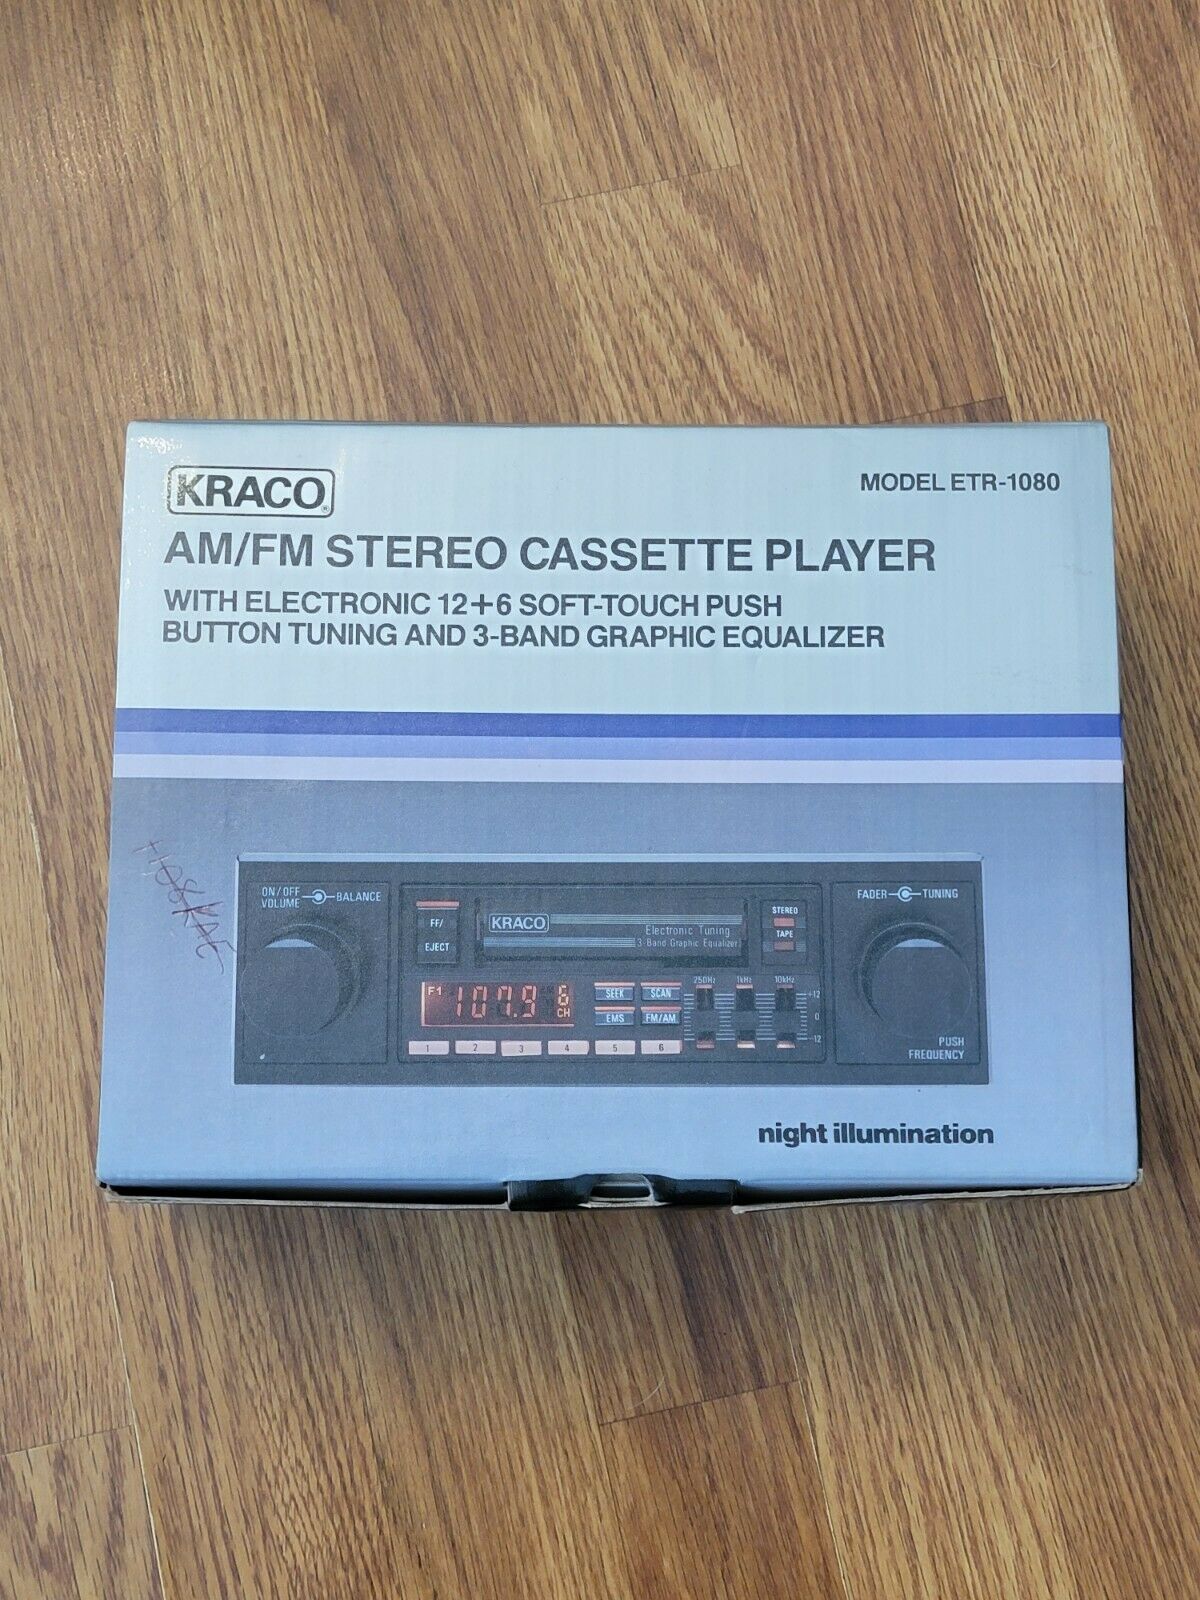 New In Box Vintage Kraco Model Etr-1080 Stereo Cassette Player With Equalizer